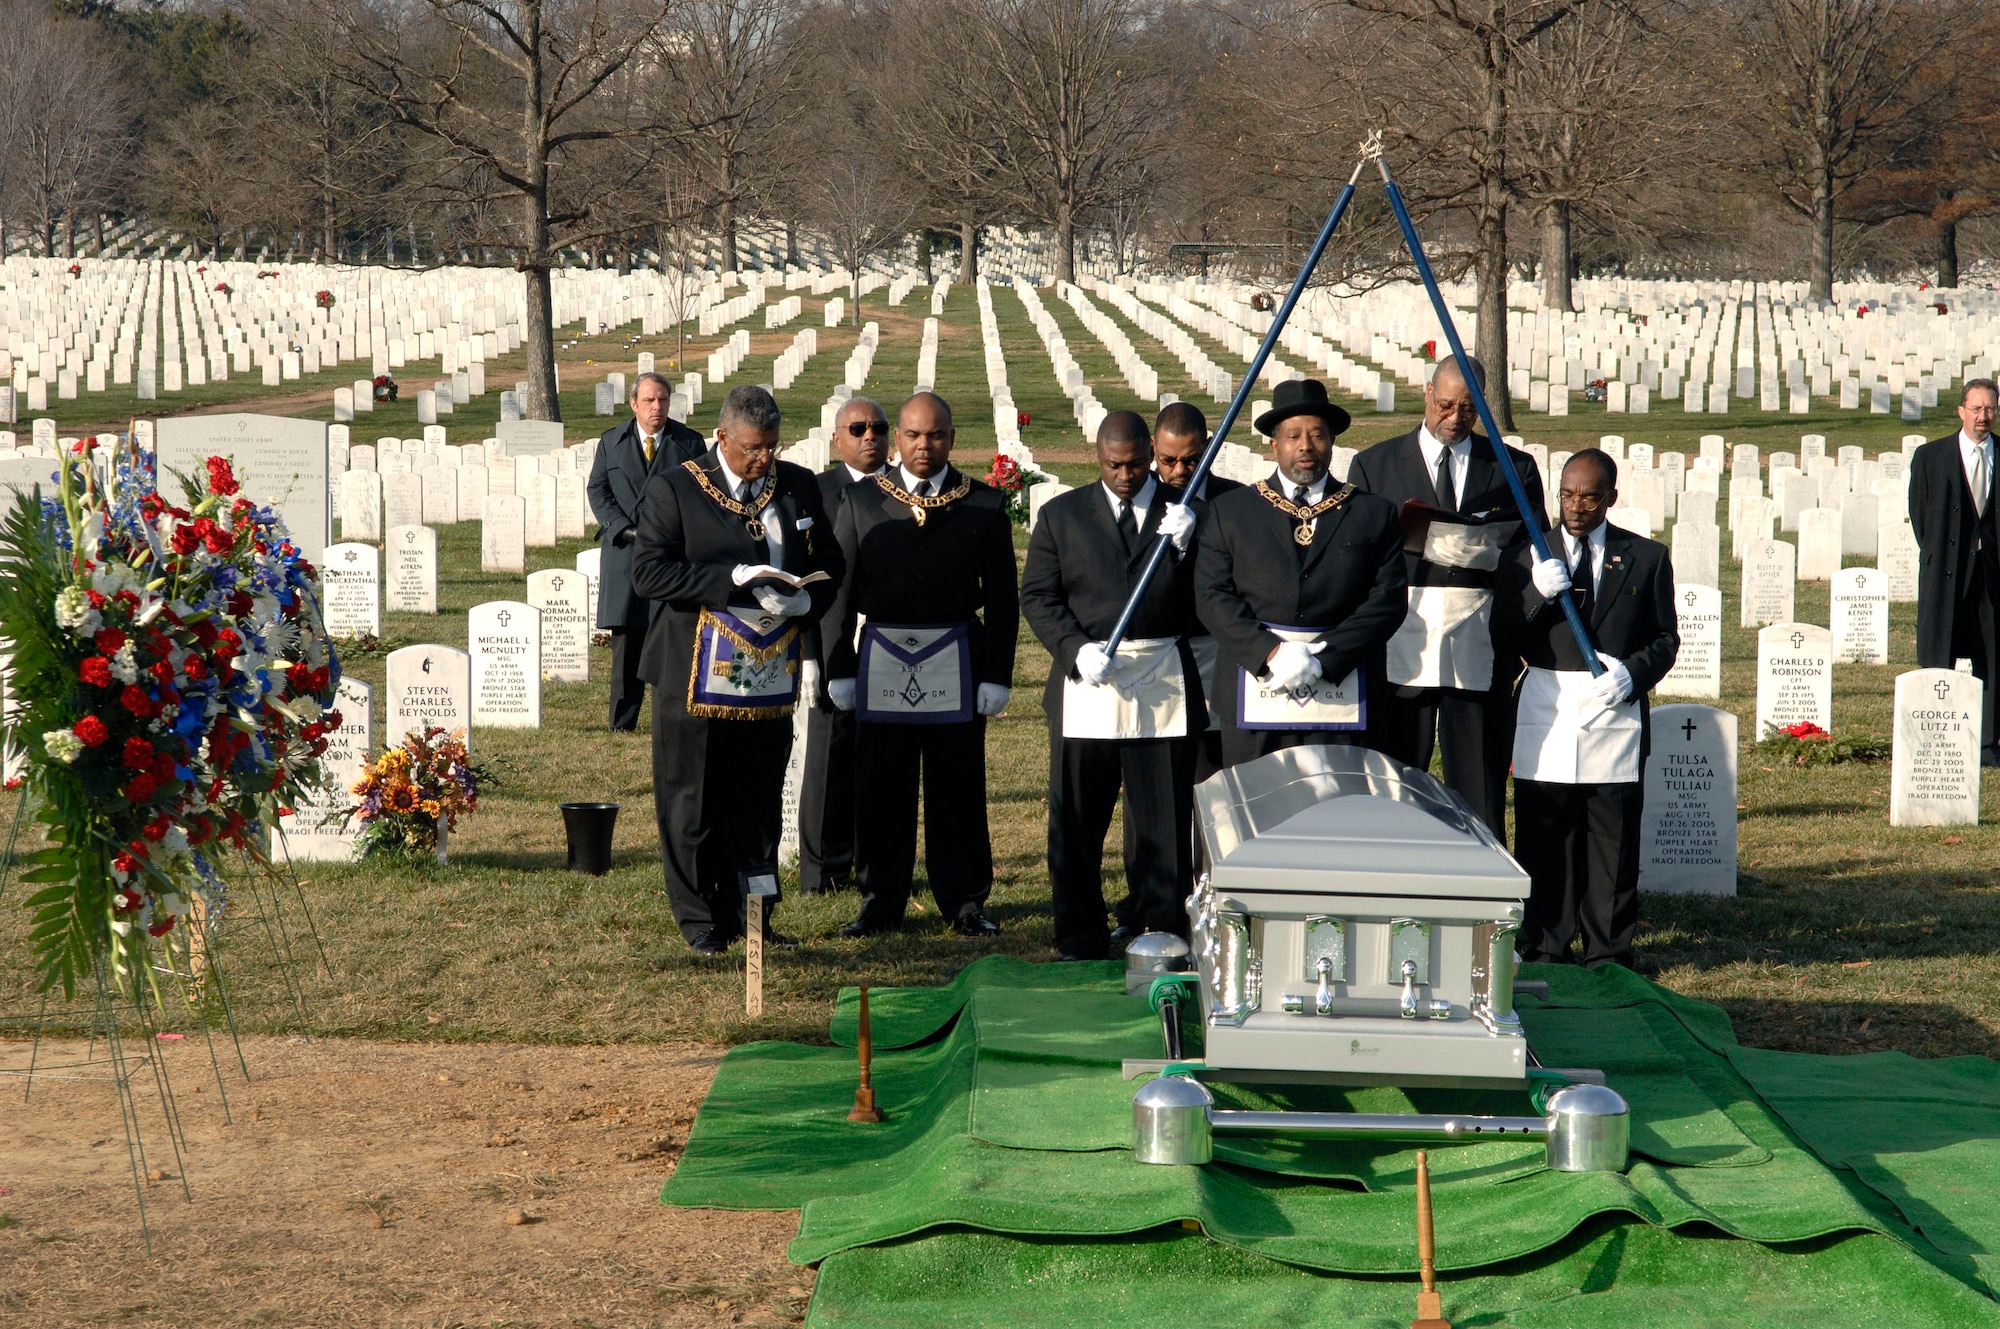 District Deputy Grand Master of the 31st Masonic District Clifton Johnson Sr. leads his lodge brothers in prayer beside the casket of Capt. Kermit Evans during the Masonic burial portion of his funeral Dec. 12 at Arlington National Cemetery. Captain Evans had been a Mason for more than a year. More than 200 friends and relatives gathered to pay their respects to Captain Evans, a member of the 27th Civil Engineering Squadron Explosives Ordnance Disposal Flight at Cannon Air Force Base, N.M. He was deployed to Iraq when the helicopter he was a passenger in made an emergency landing and crashed. He was one of the four out of 16 who were killed as a result of the crash. He is survived by his wife, Perneatha, and Kermit Jr., their 13-month-old son.(U.S. Air Force photo/Tech. Sgt. Cohen Young) 